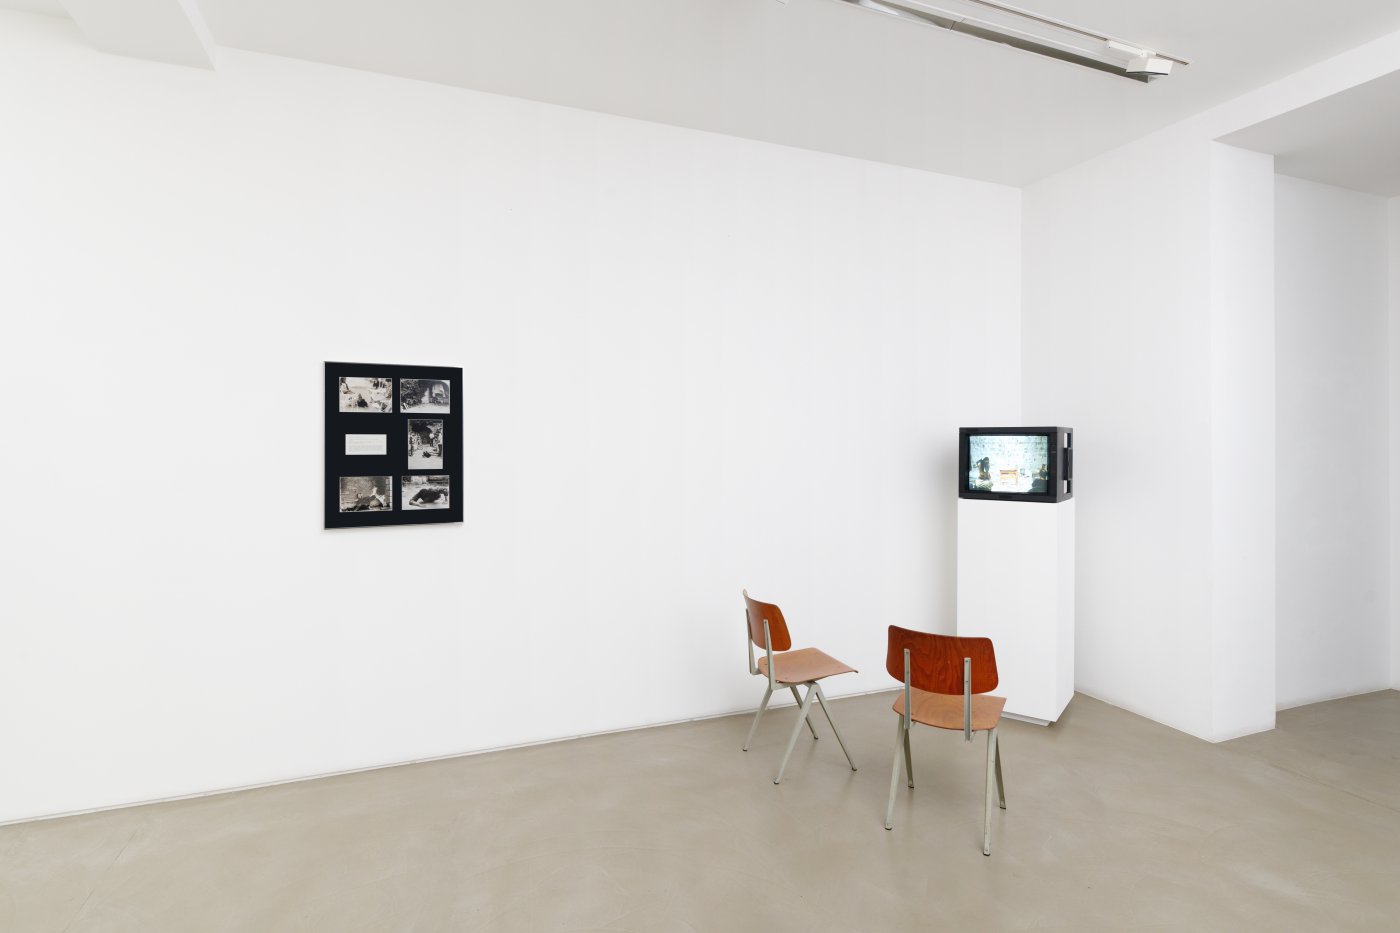 Installation image for Mona Hatoum: Performance Documents, 1980-1987/2013, at Galerie Chantal Crousel